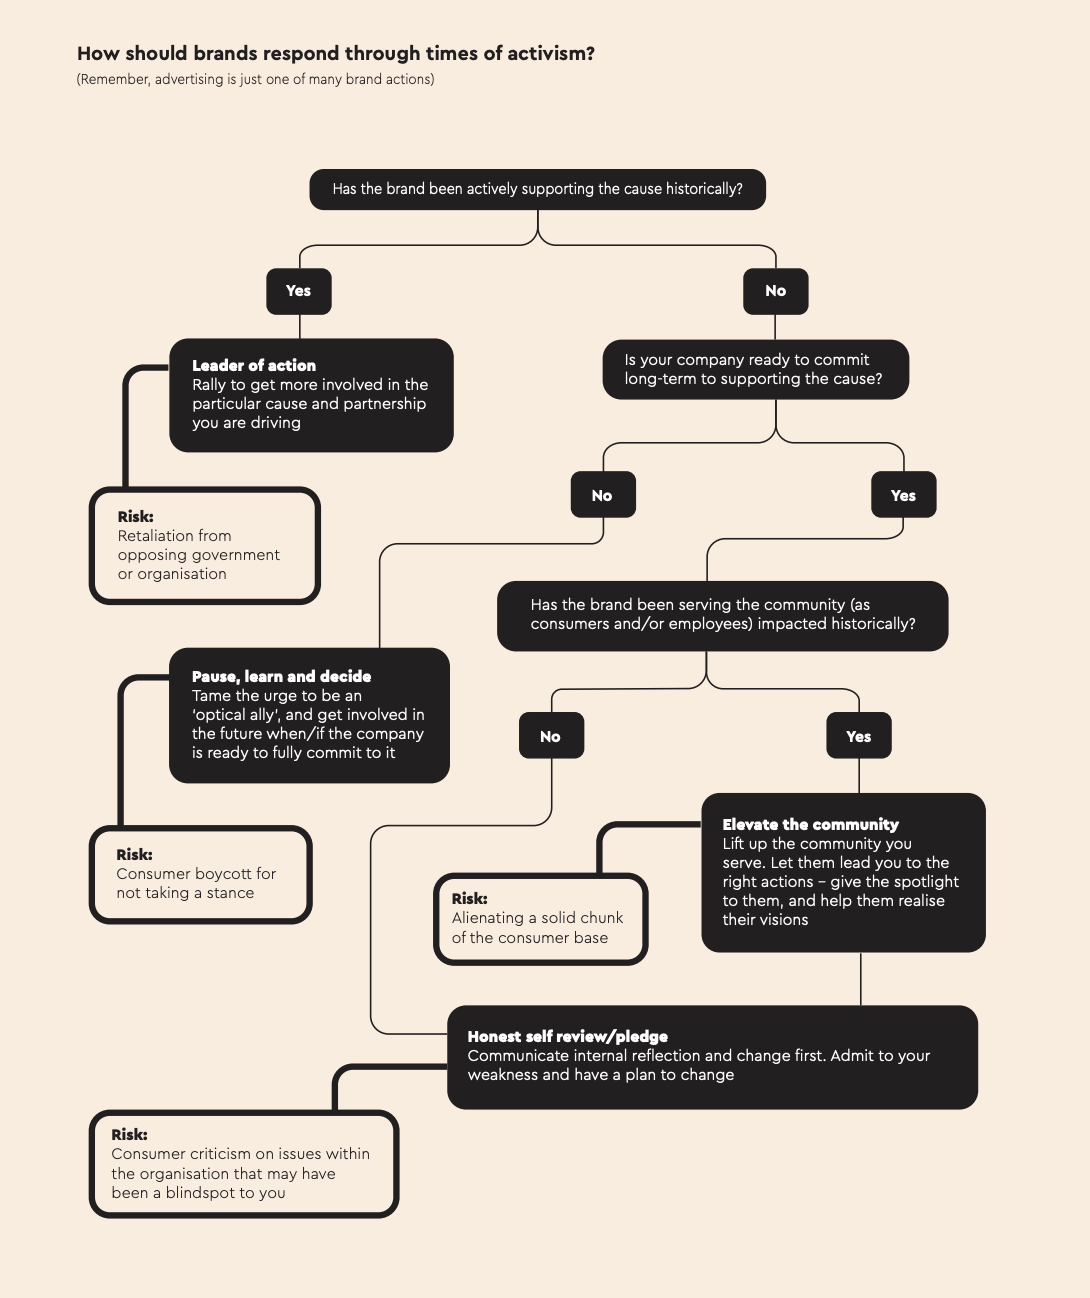 Flow chart of hows brands should respond through times of activism